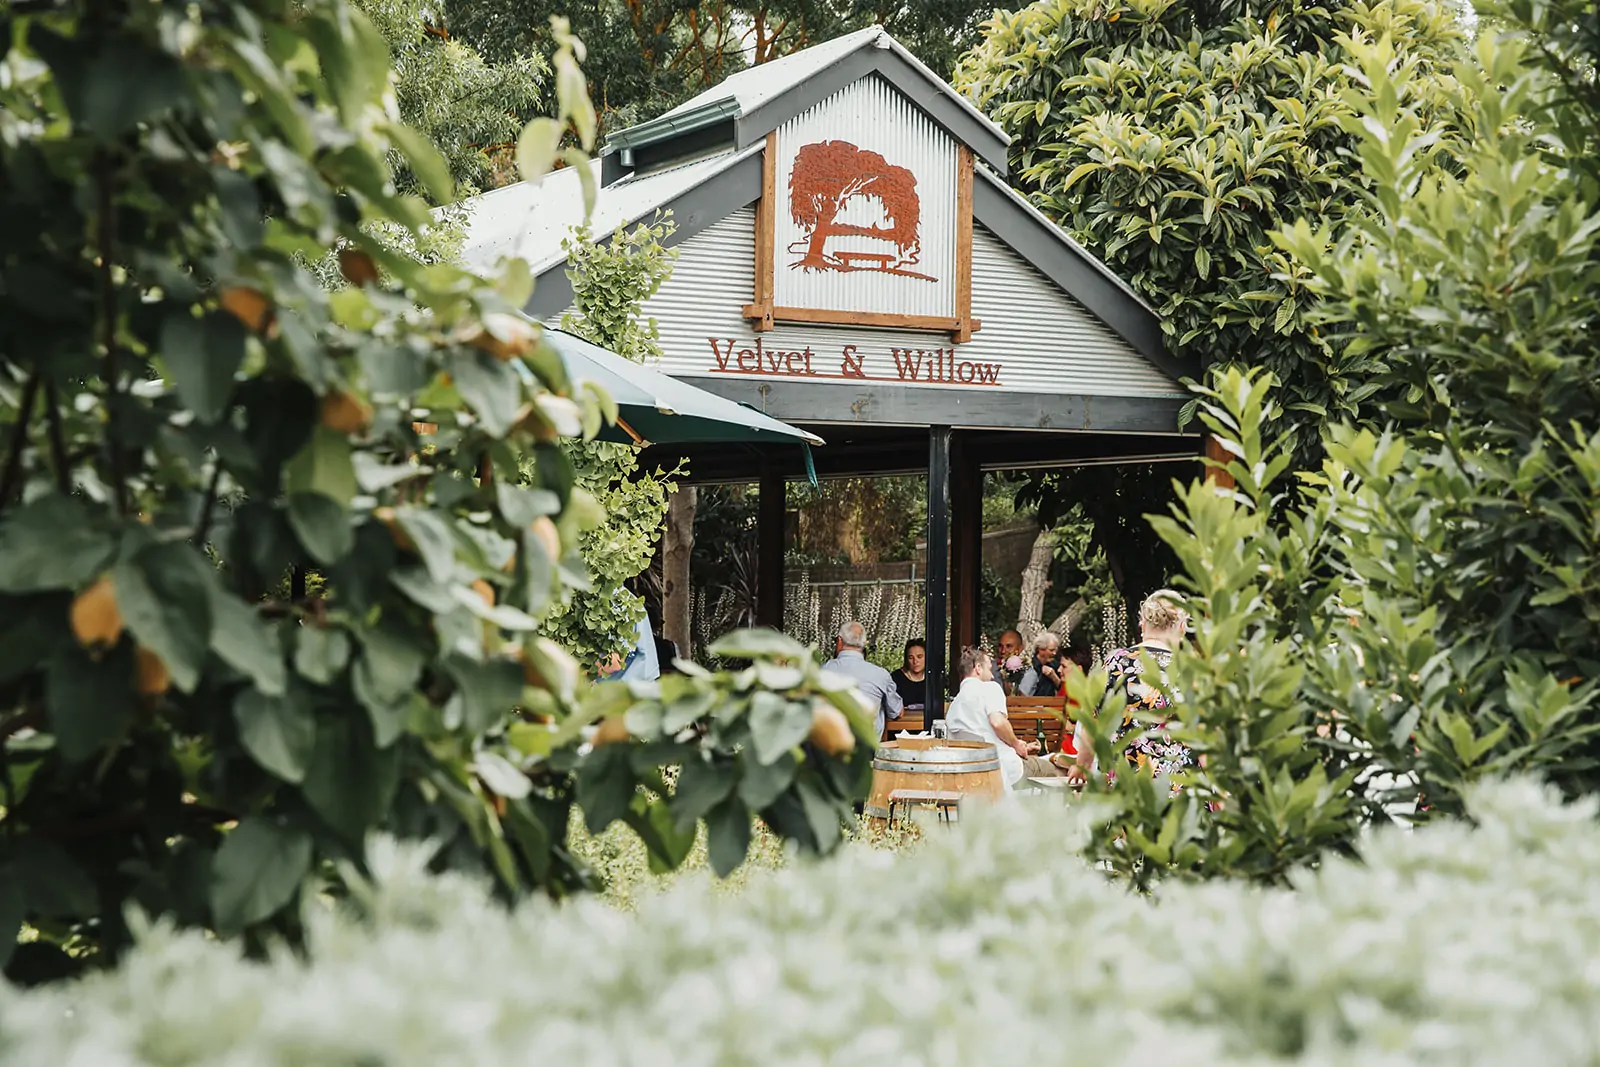 Velvet and Willow is a winery, cafe and cosy wedding venue nestled amongst lush gardens in the heart of Auburn, Clare Valley